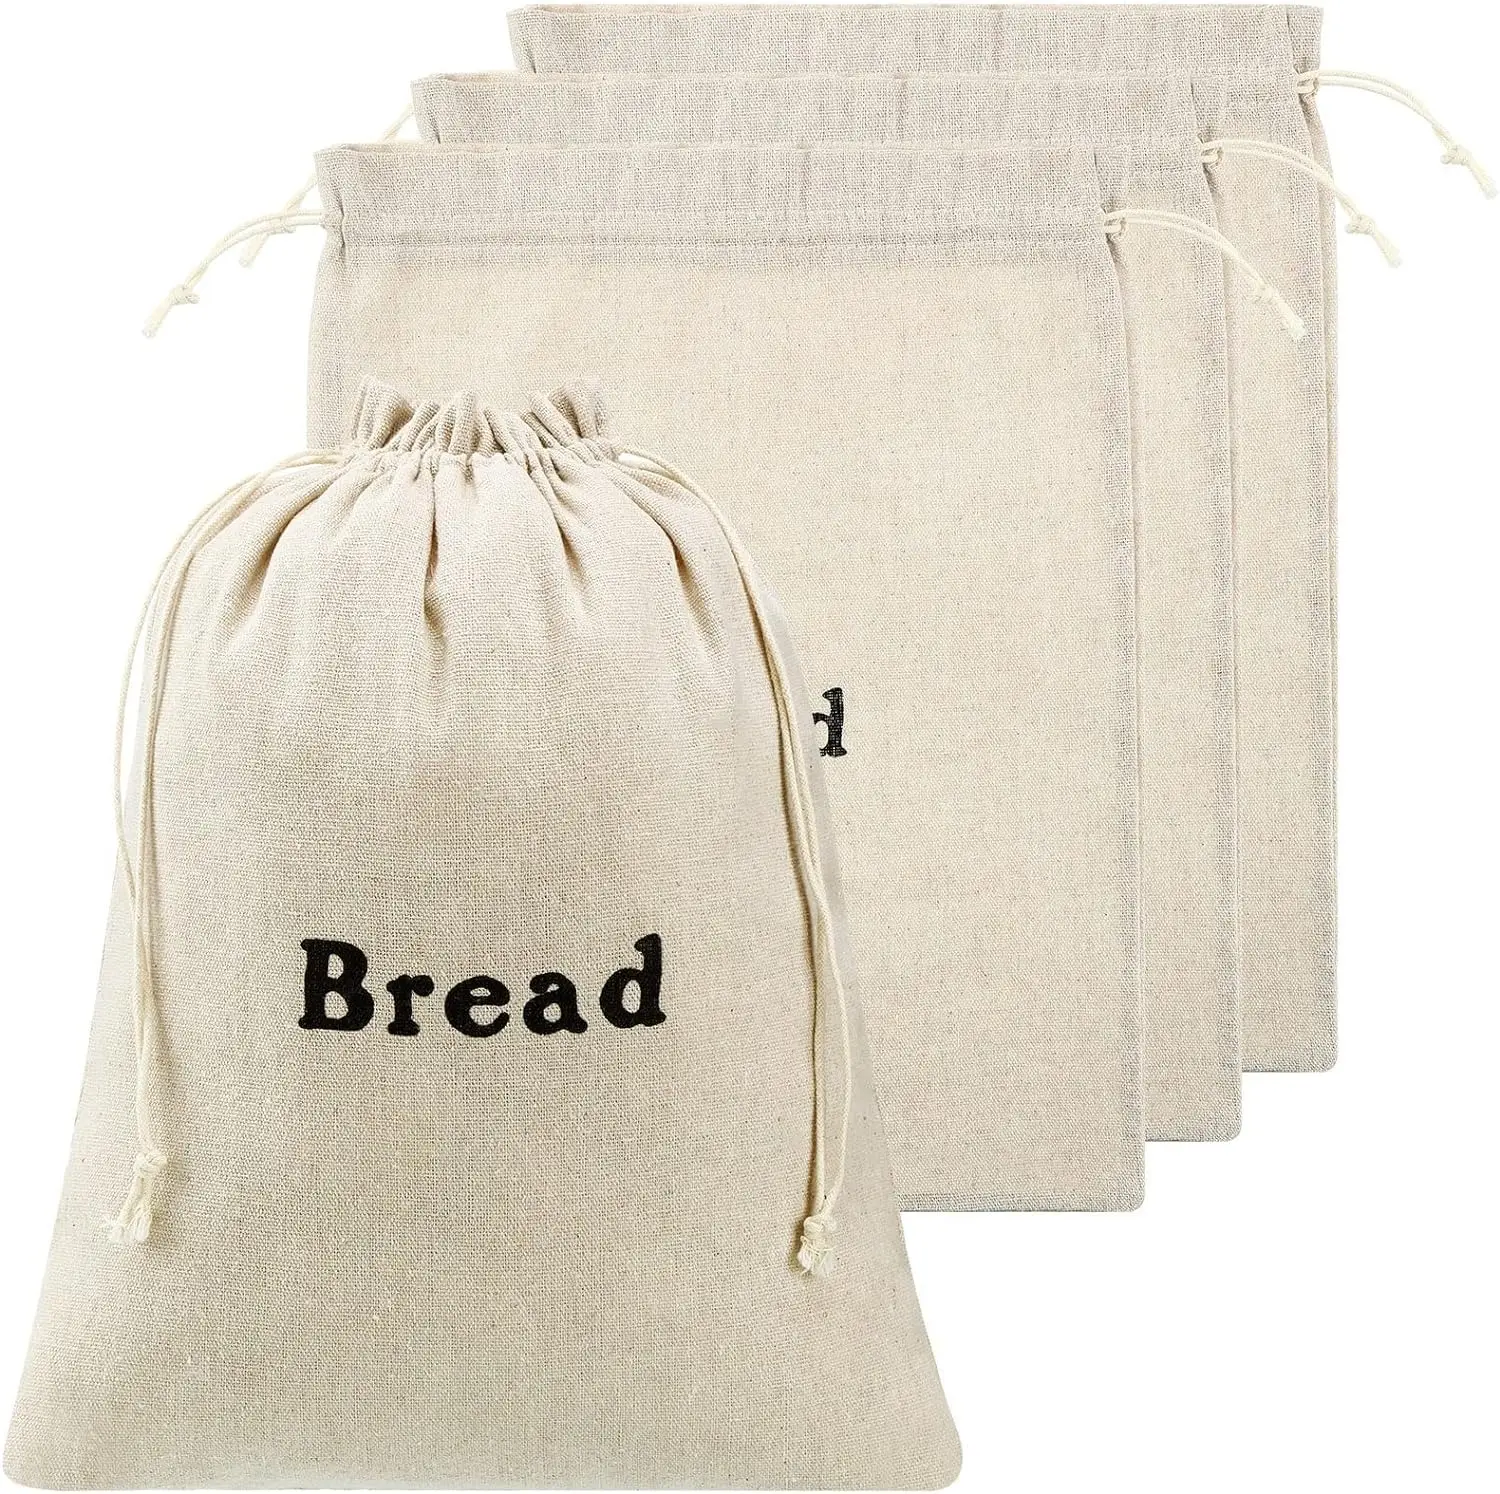 Wholesale Linen Bread Bags for Homemade Bread Reusable Drawstring Bag Food Storage for Bread Bakers Home Housewarming Gift